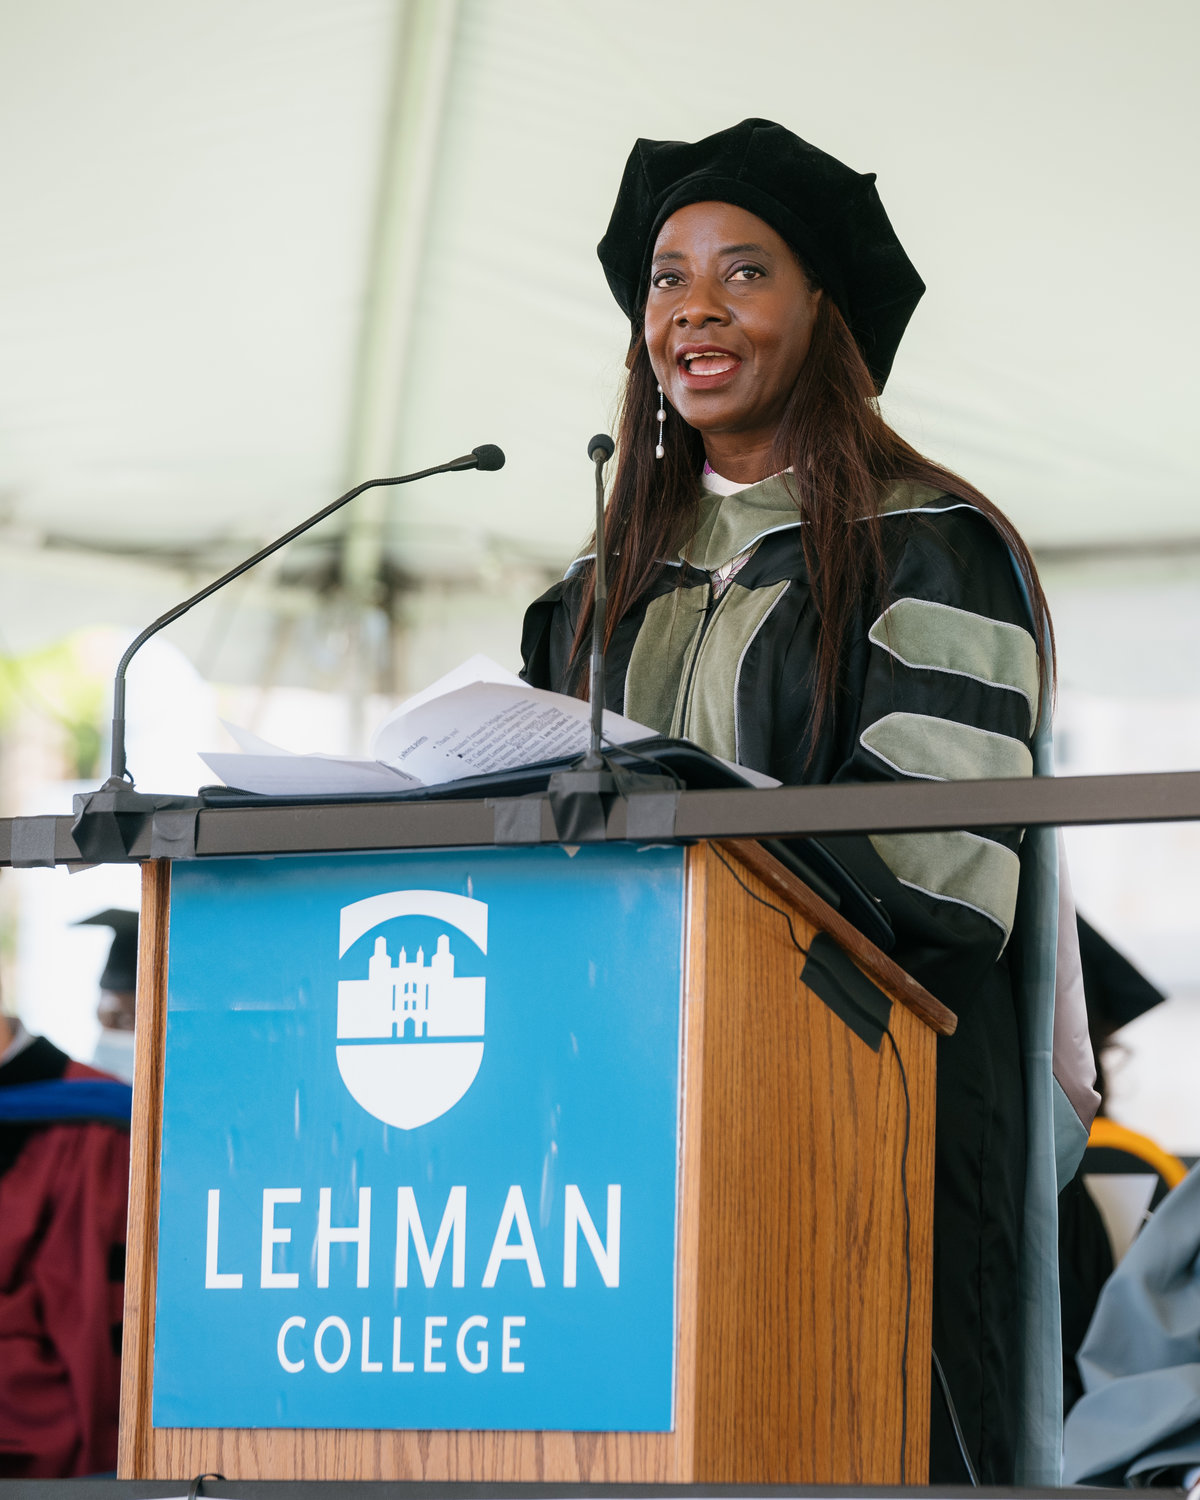 Sandra Lindsay, one of the speakers at Lehman College's 2022 commencement ceremonies May 26, told her story about being the first person to receive the COVID-19 vaccination in December 2020.